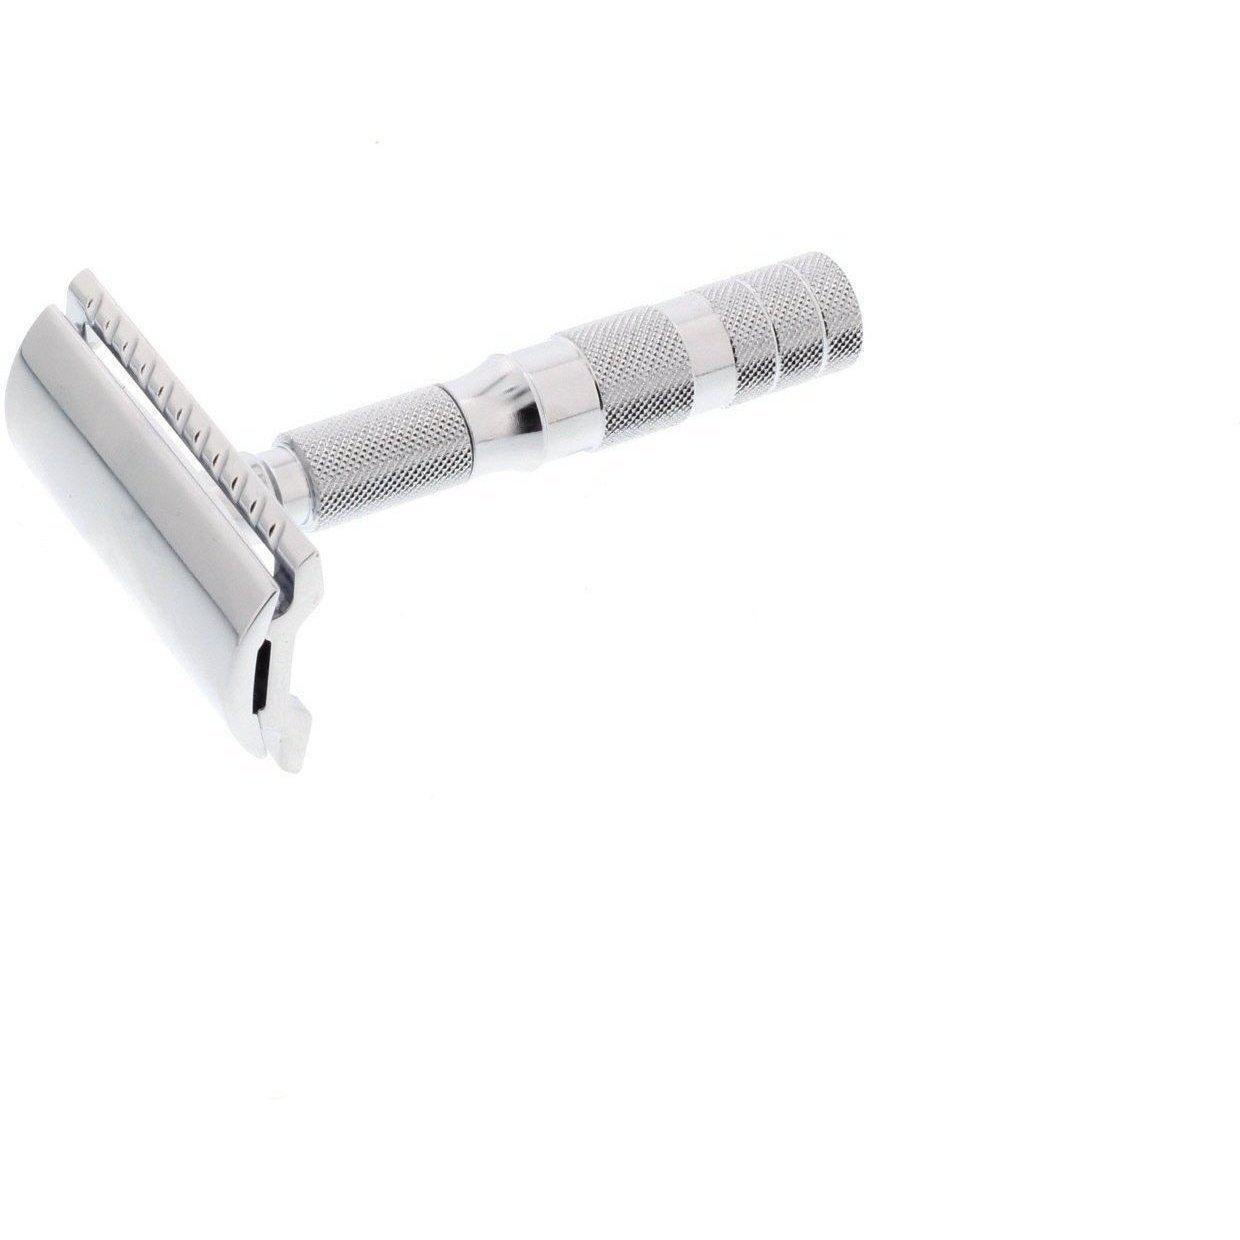 Product image 2 for Merkur Travel Safety Razor with Bar